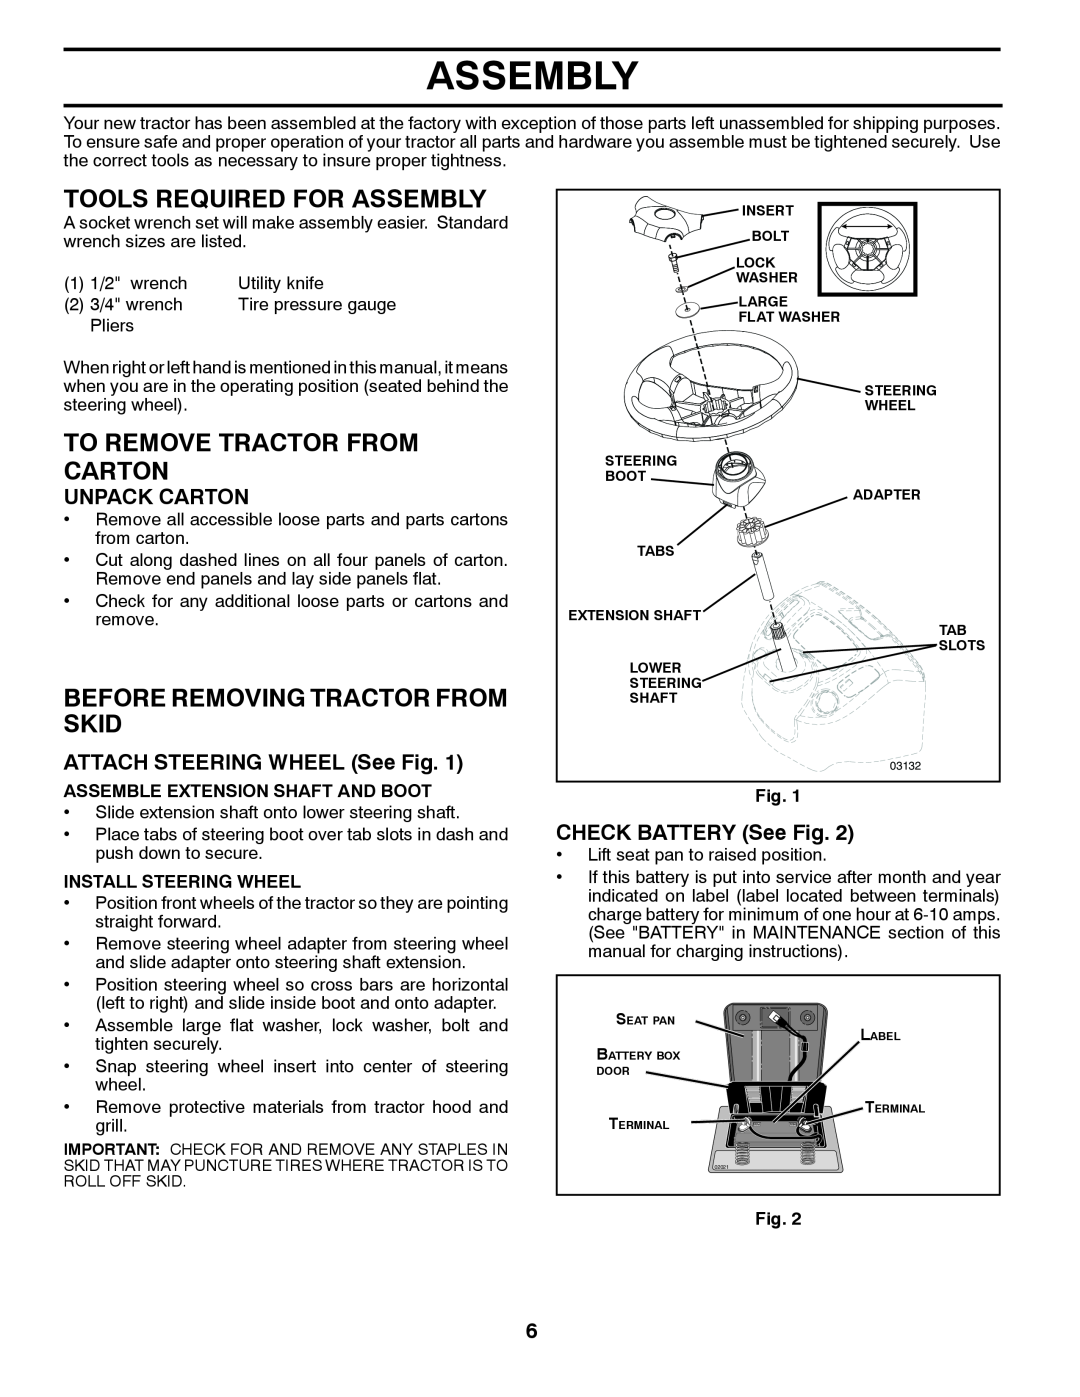 Poulan XT195H42LT manual Tools Required For Assembly, To Remove Tractor From Carton, Before Removing Tractor From Skid 